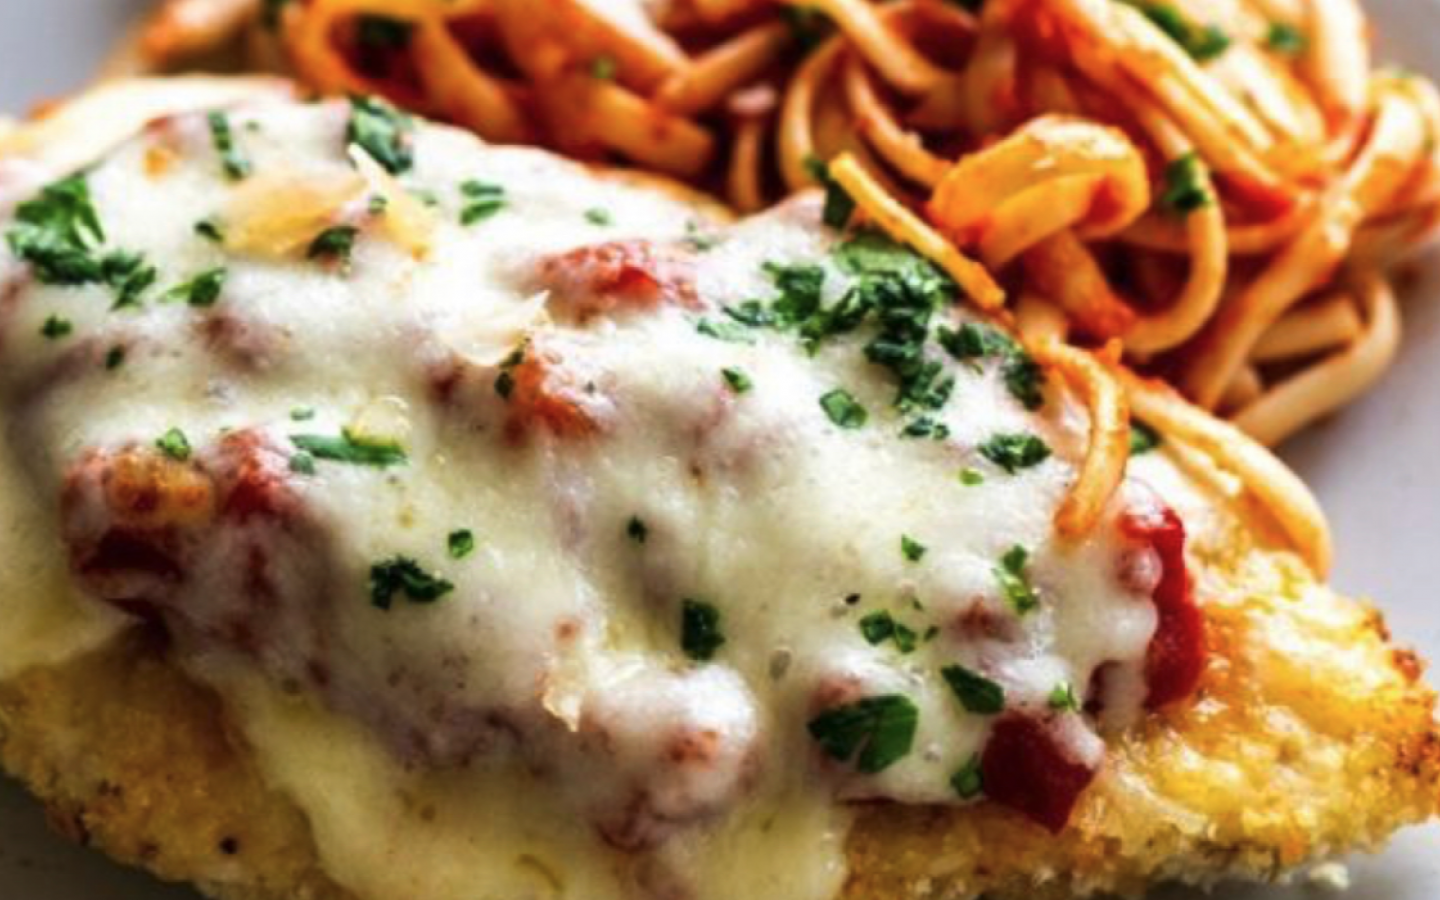 chicken Parmesan with a side of thin pasta